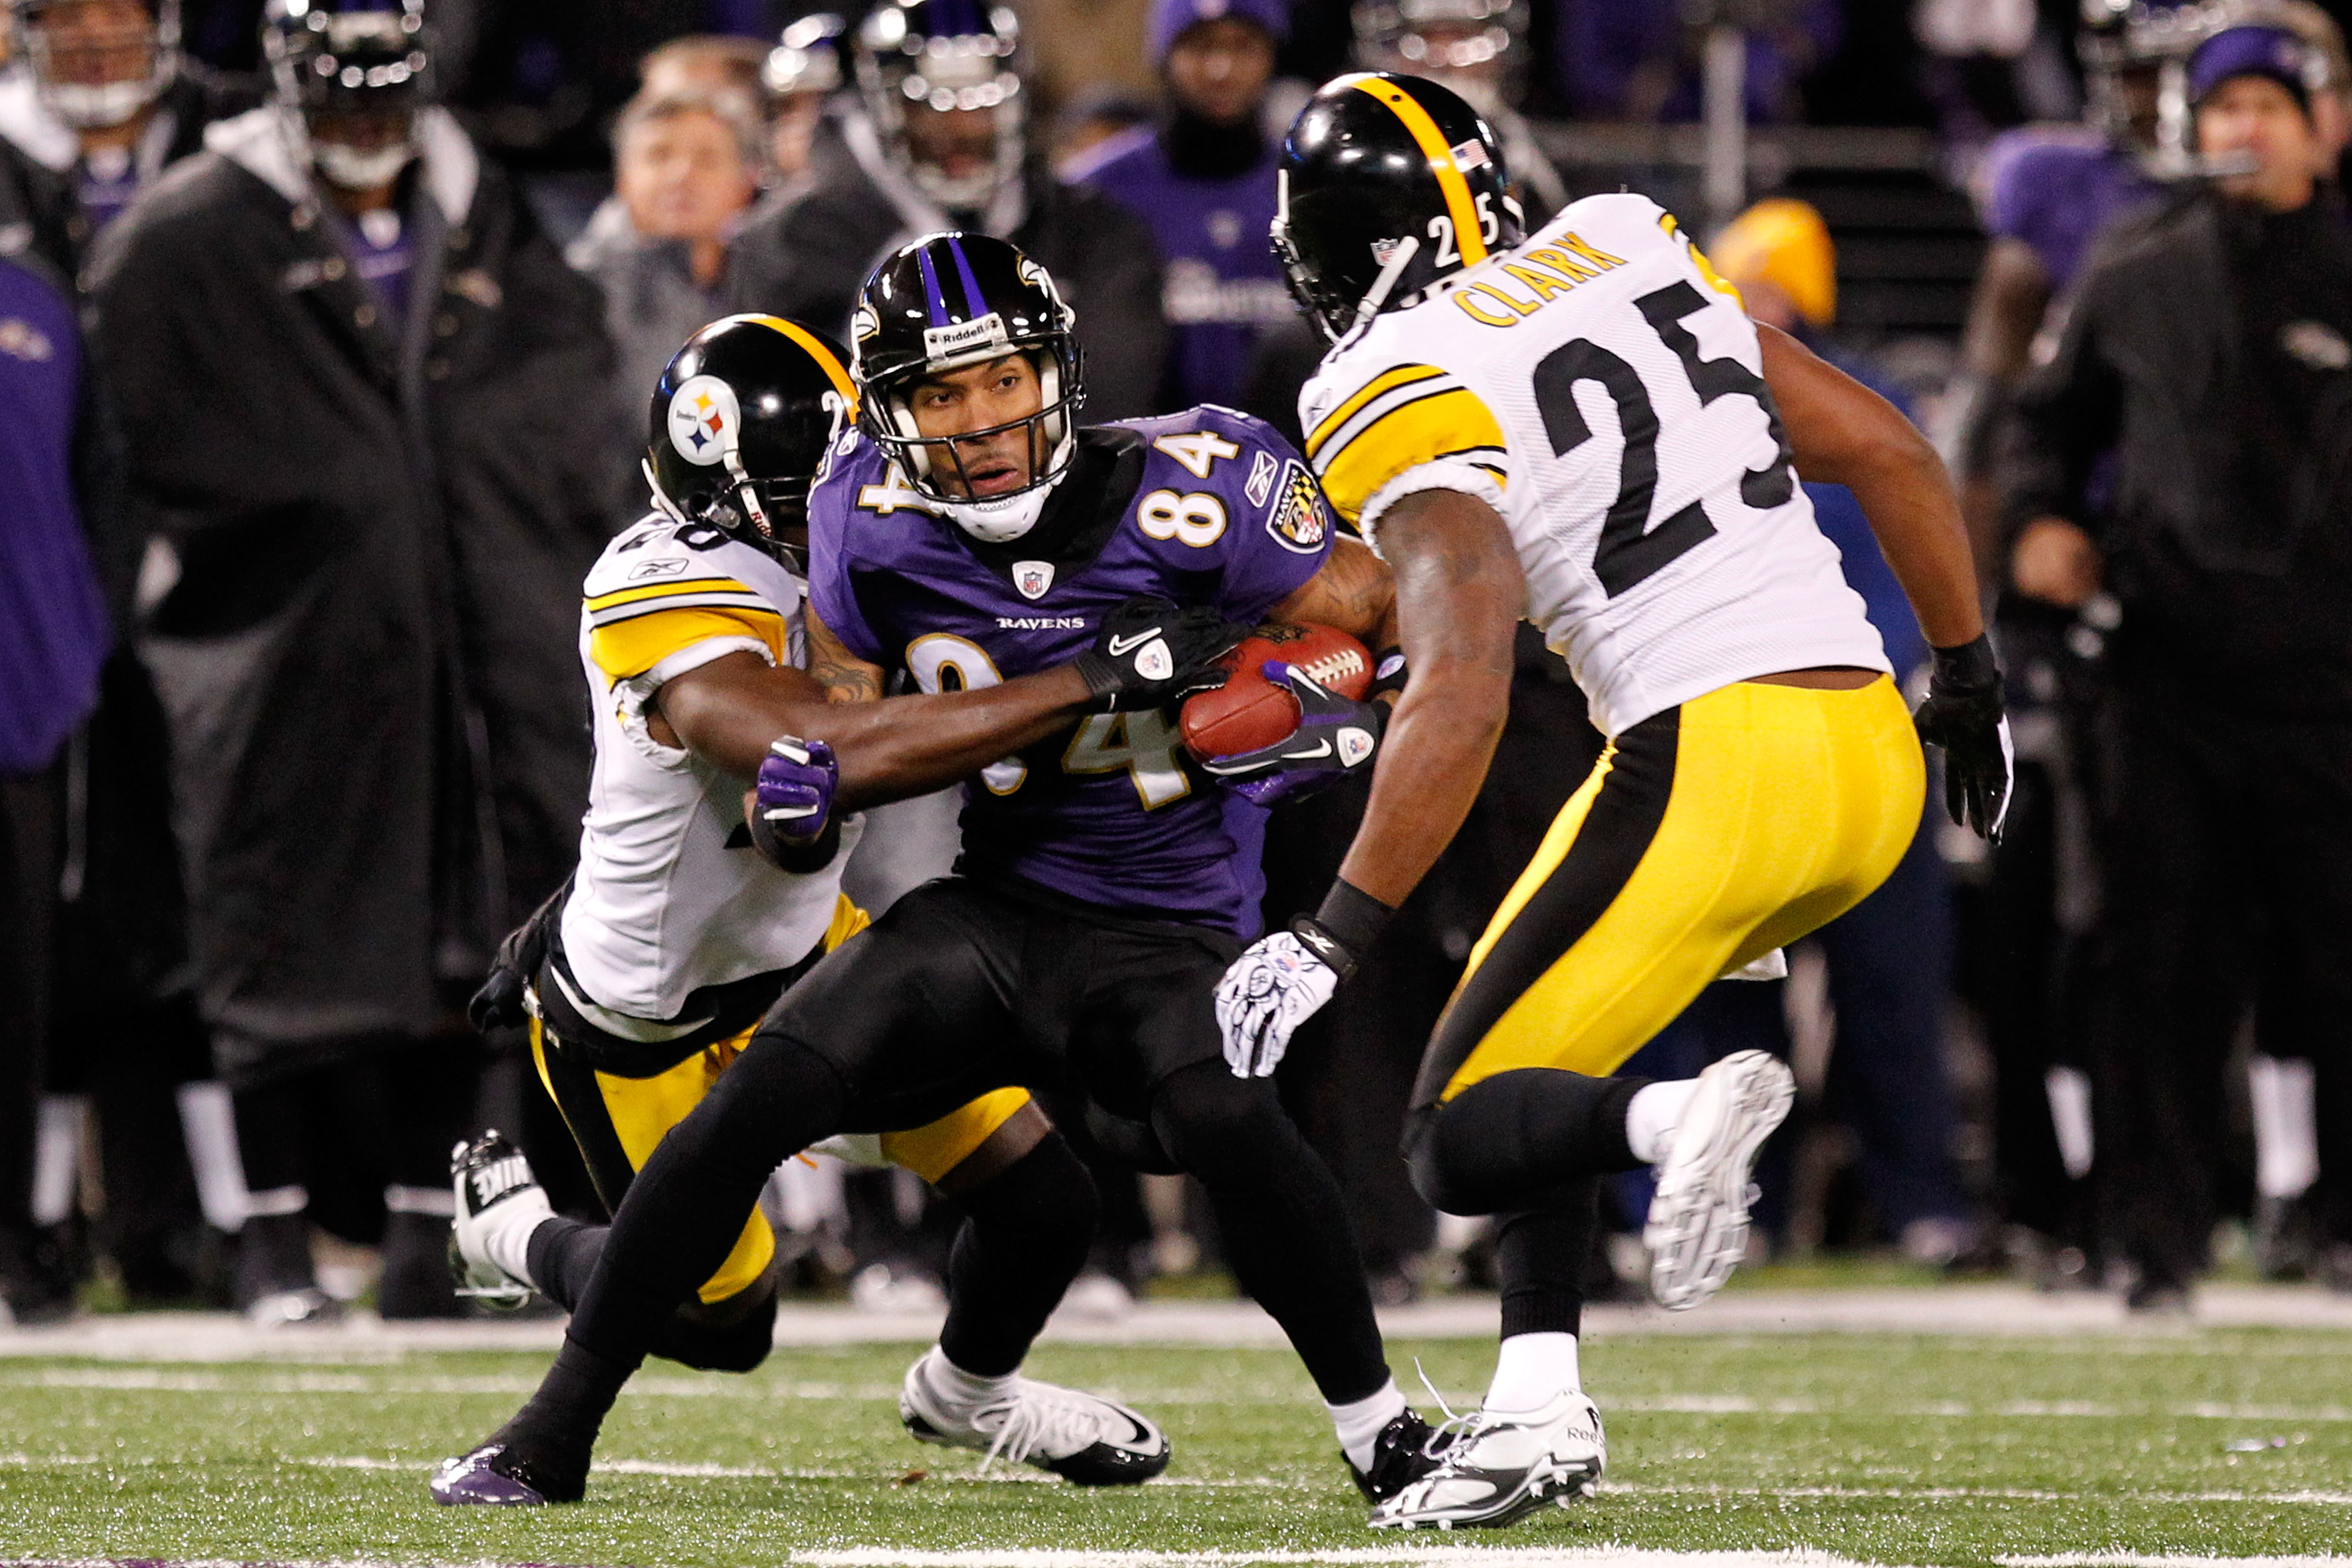 BALTIMORE, MD - DECEMBER 05:  T.J. Houshmandzadeh #84 of the Baltimore Ravens holds onto the ball against the Pittsburgh Steelers during the second quarter of the game at M&T Bank Stadium on December 5, 2010 in Baltimore, Maryland.  (Photo by Geoff Burke/